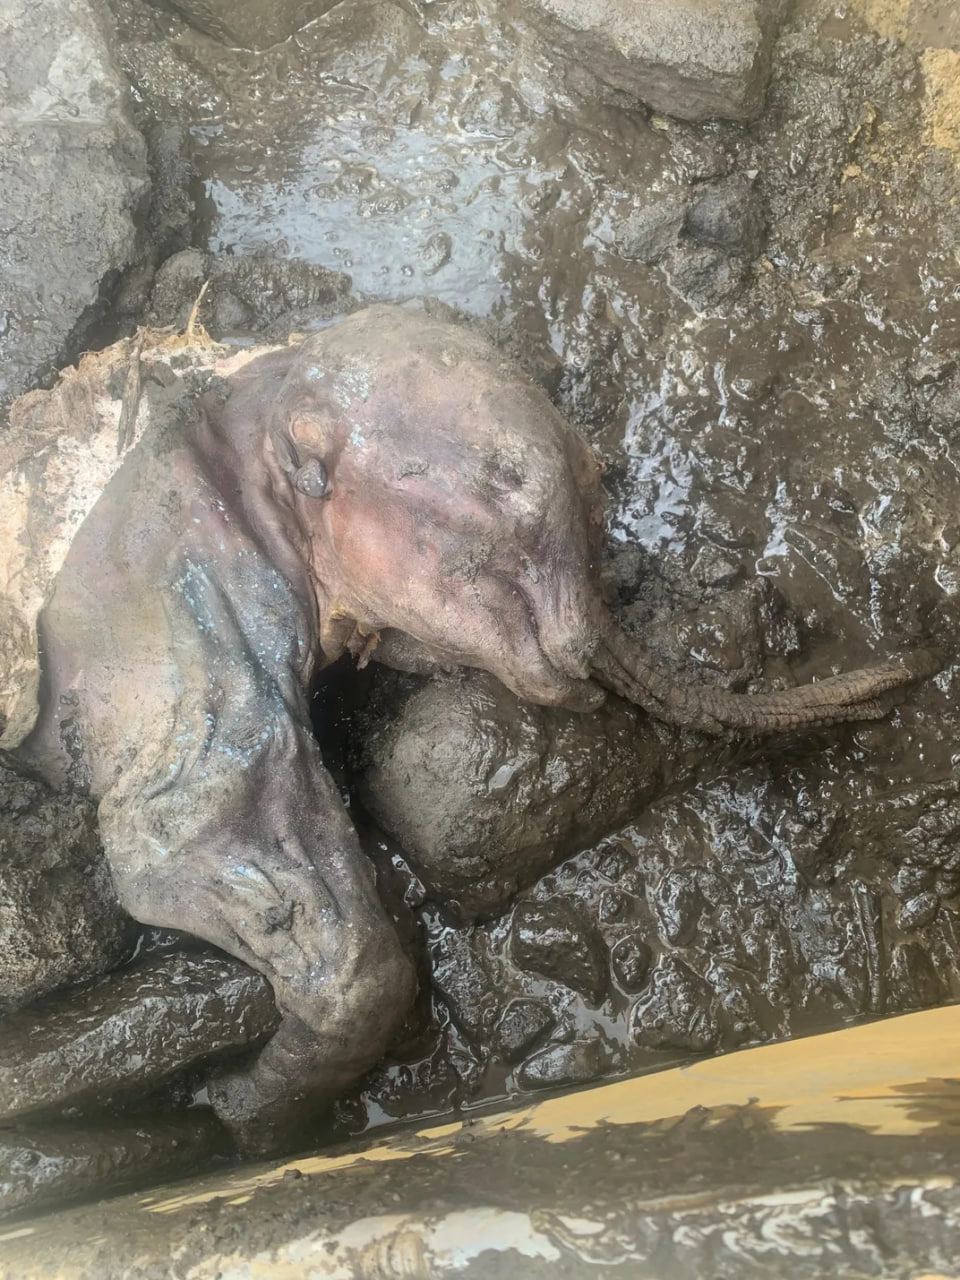 A baby mammoth has just been discovered by a Yukon gold miner. It is more than 30000 years old! Preserved by permafrost ice.